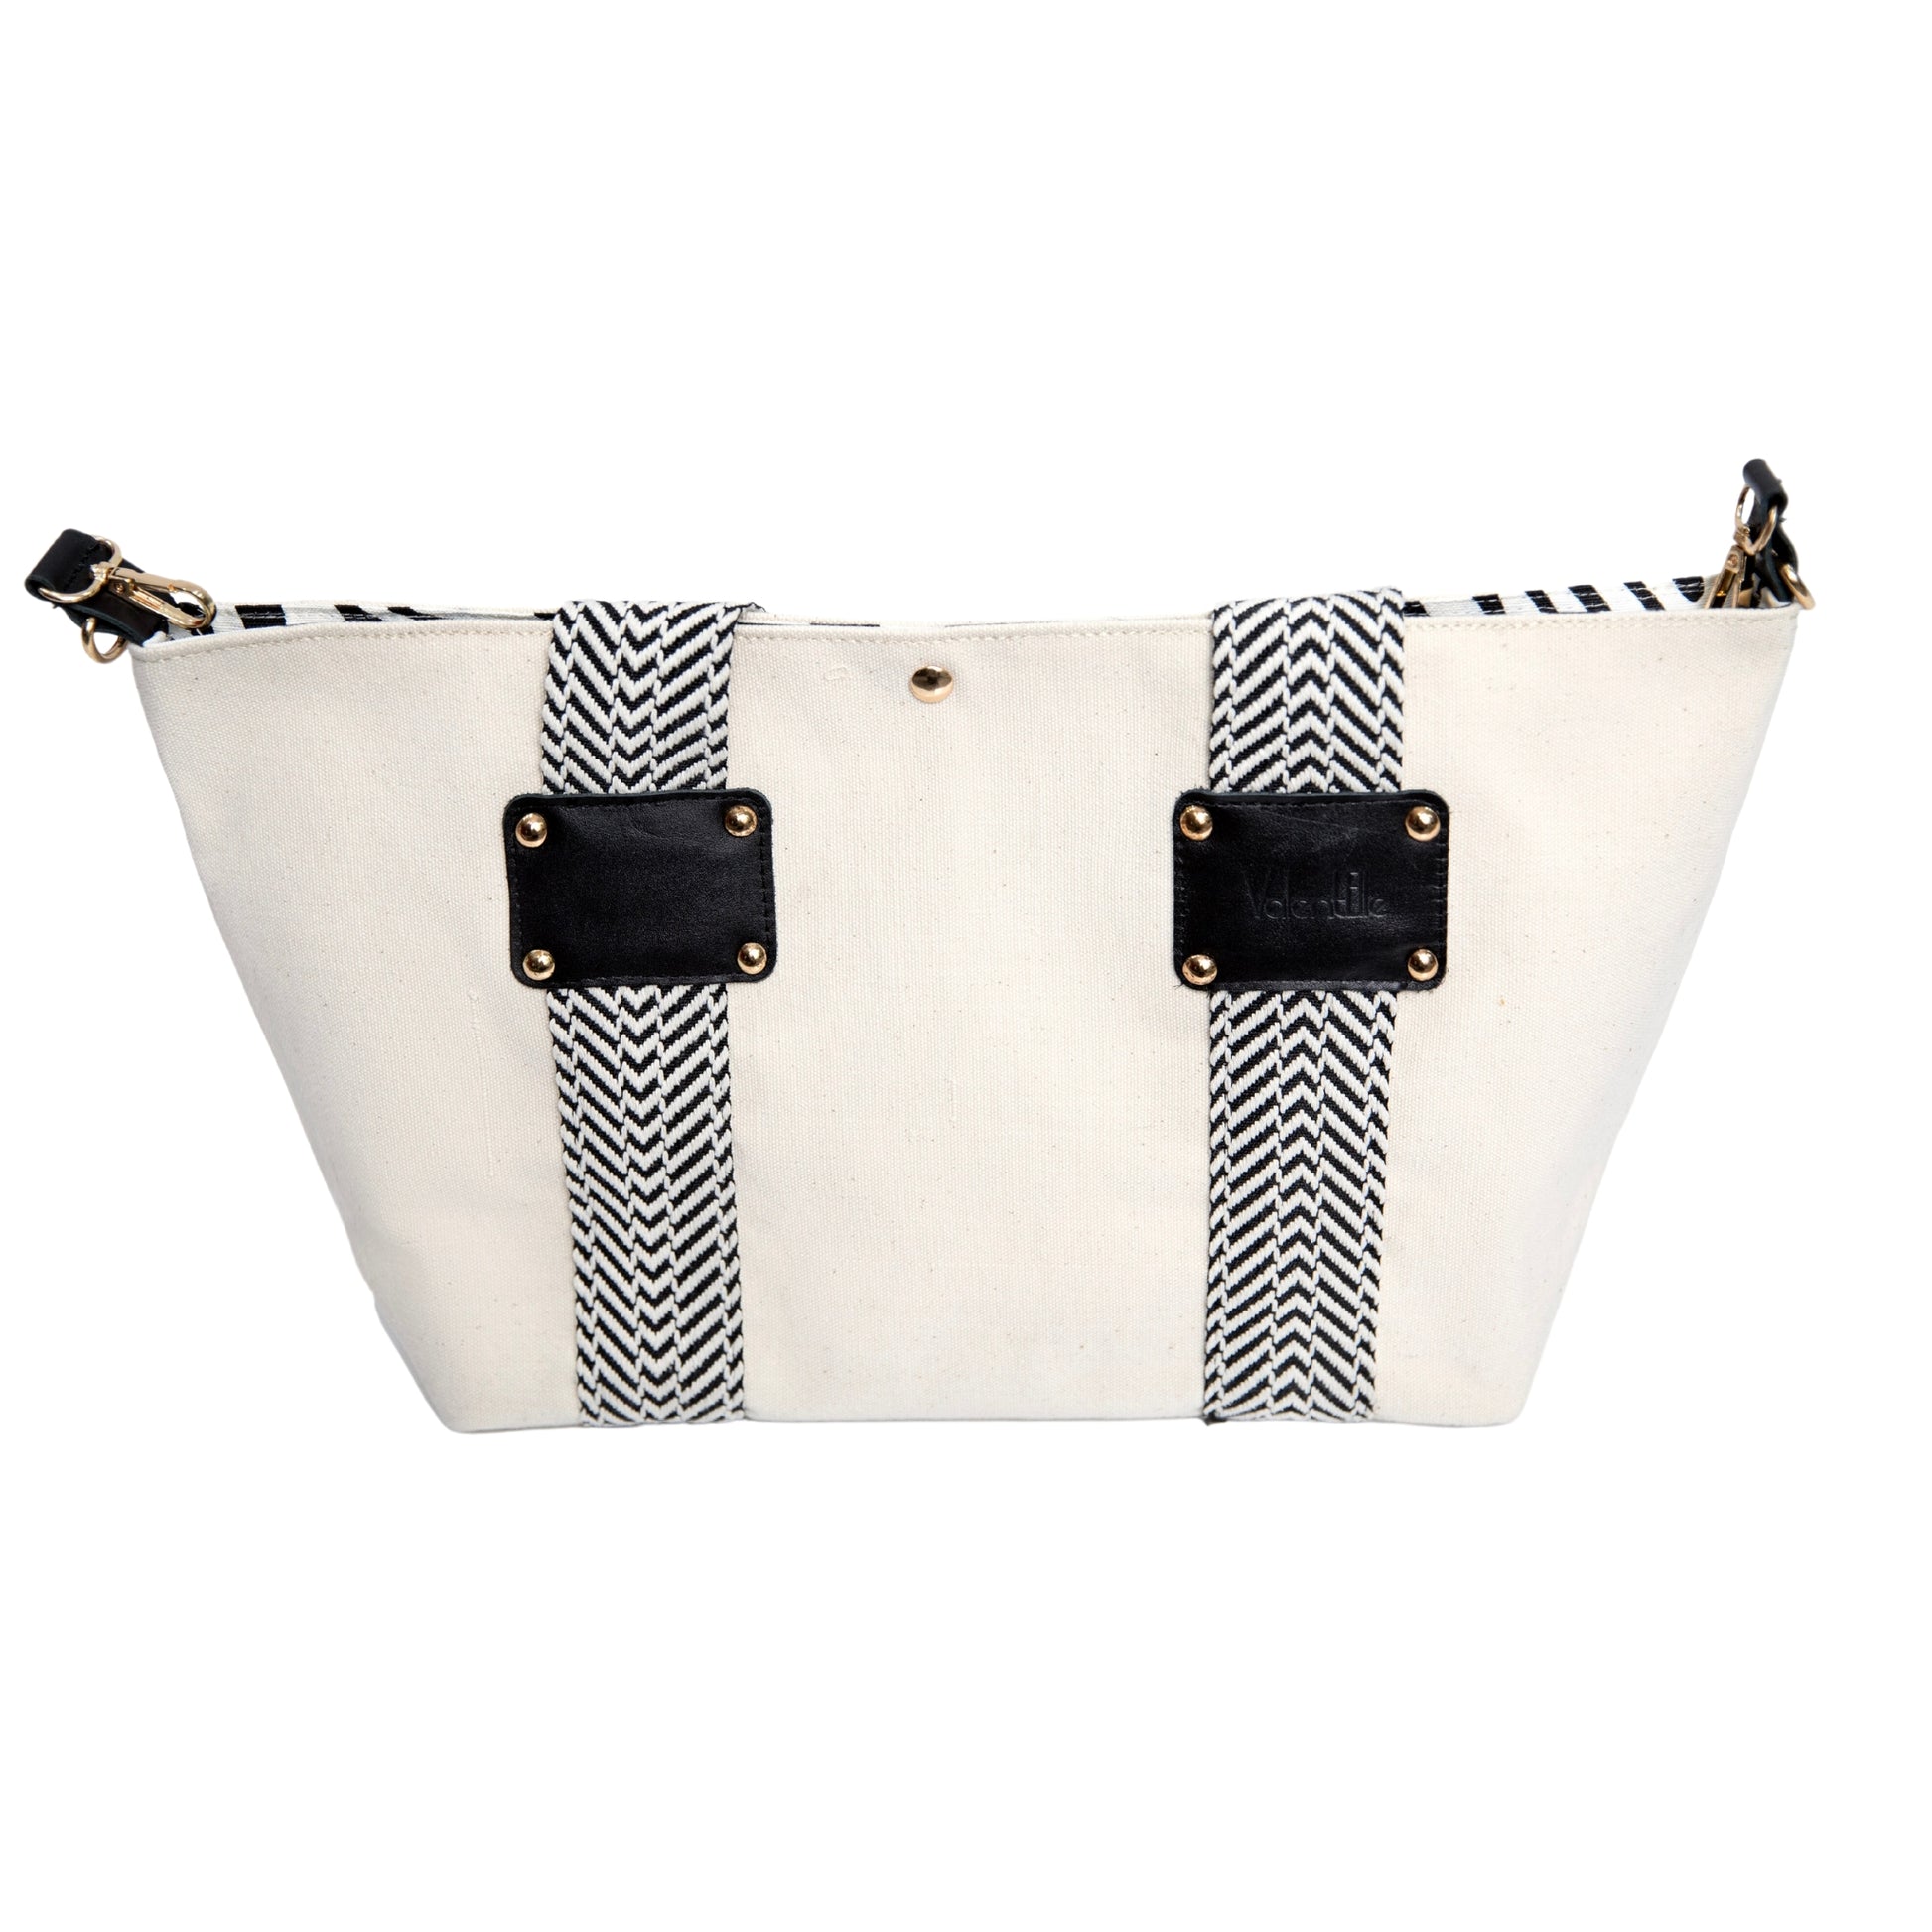 SAC CABAS BLANC FEMME LUXE